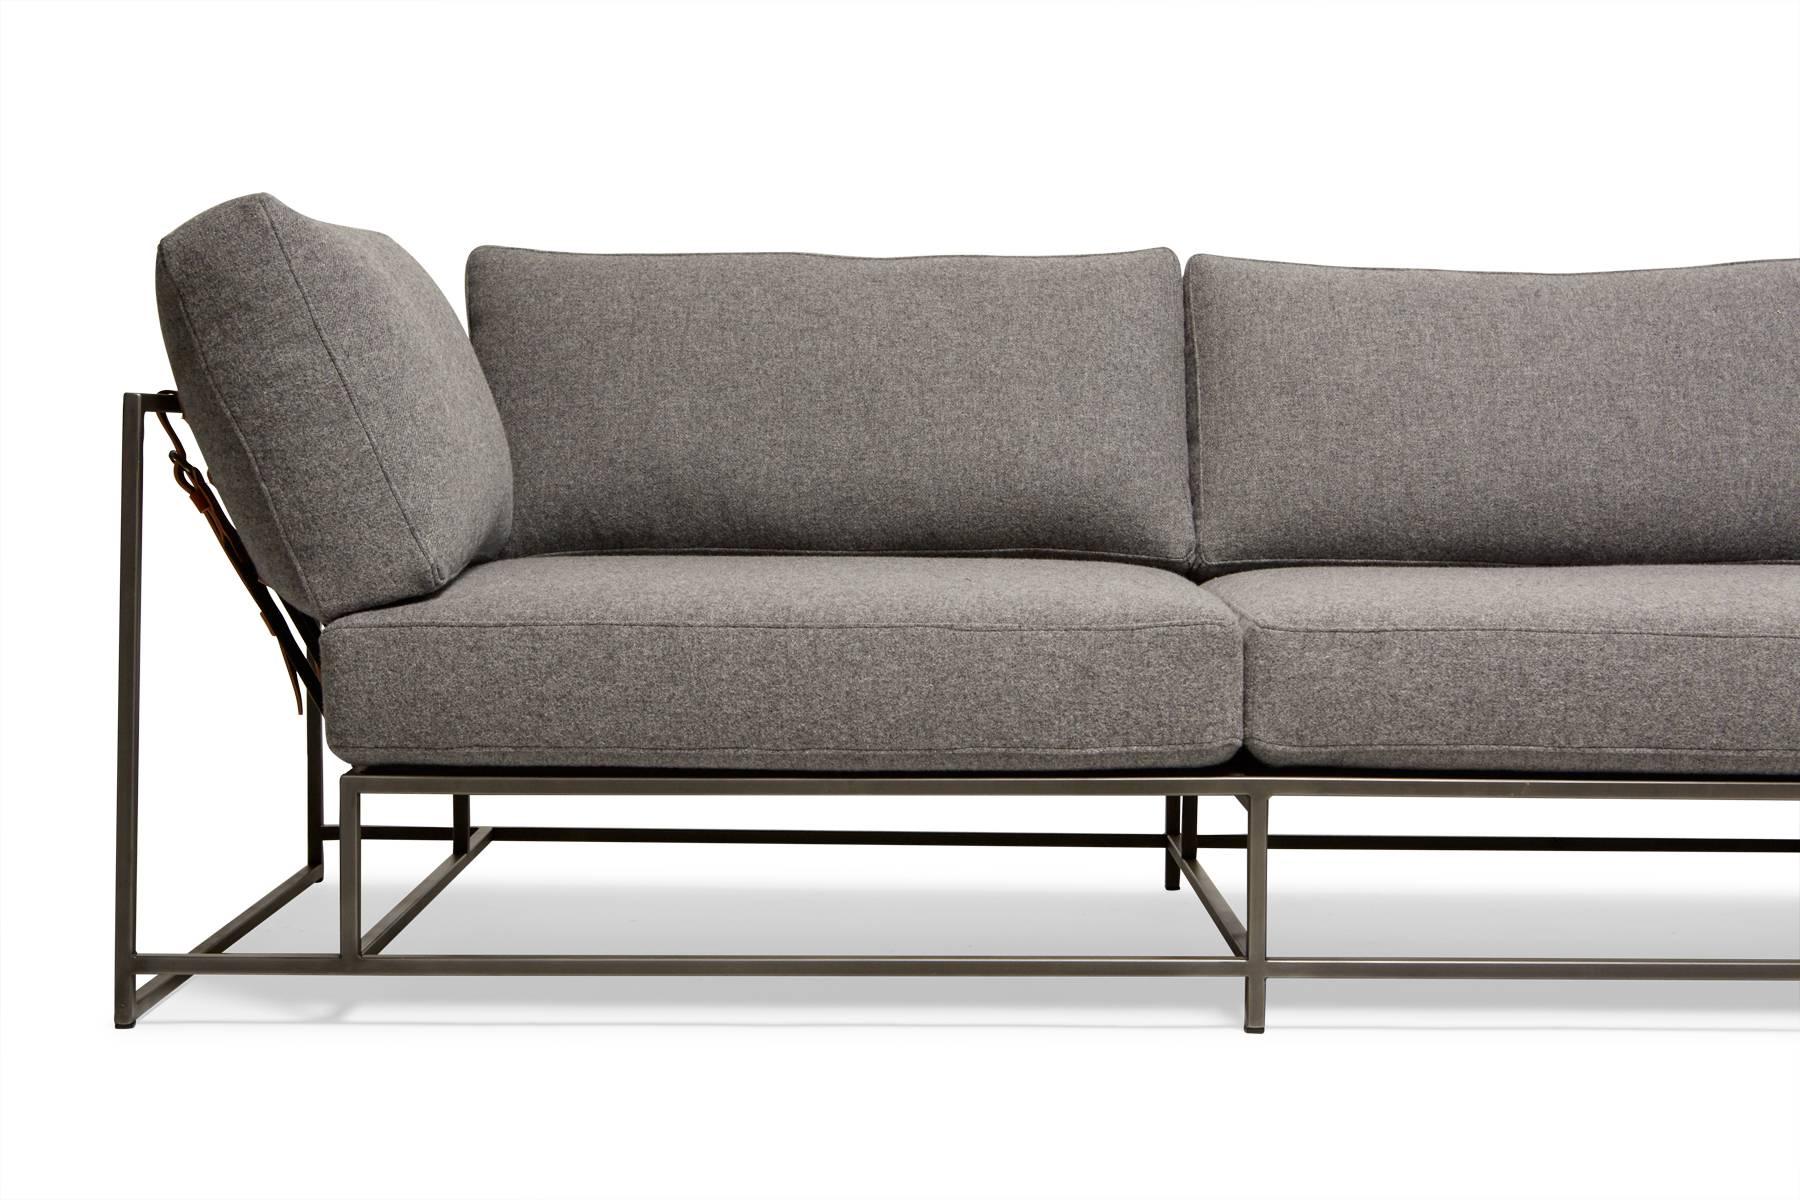 This sectional has an extra-wide chaise section to allow for the whole family to lounge together. Made in two pieces, leather cuffs are included to connect the frames together. Covers are made with soft grey wool upholstery, atop a blackened steel